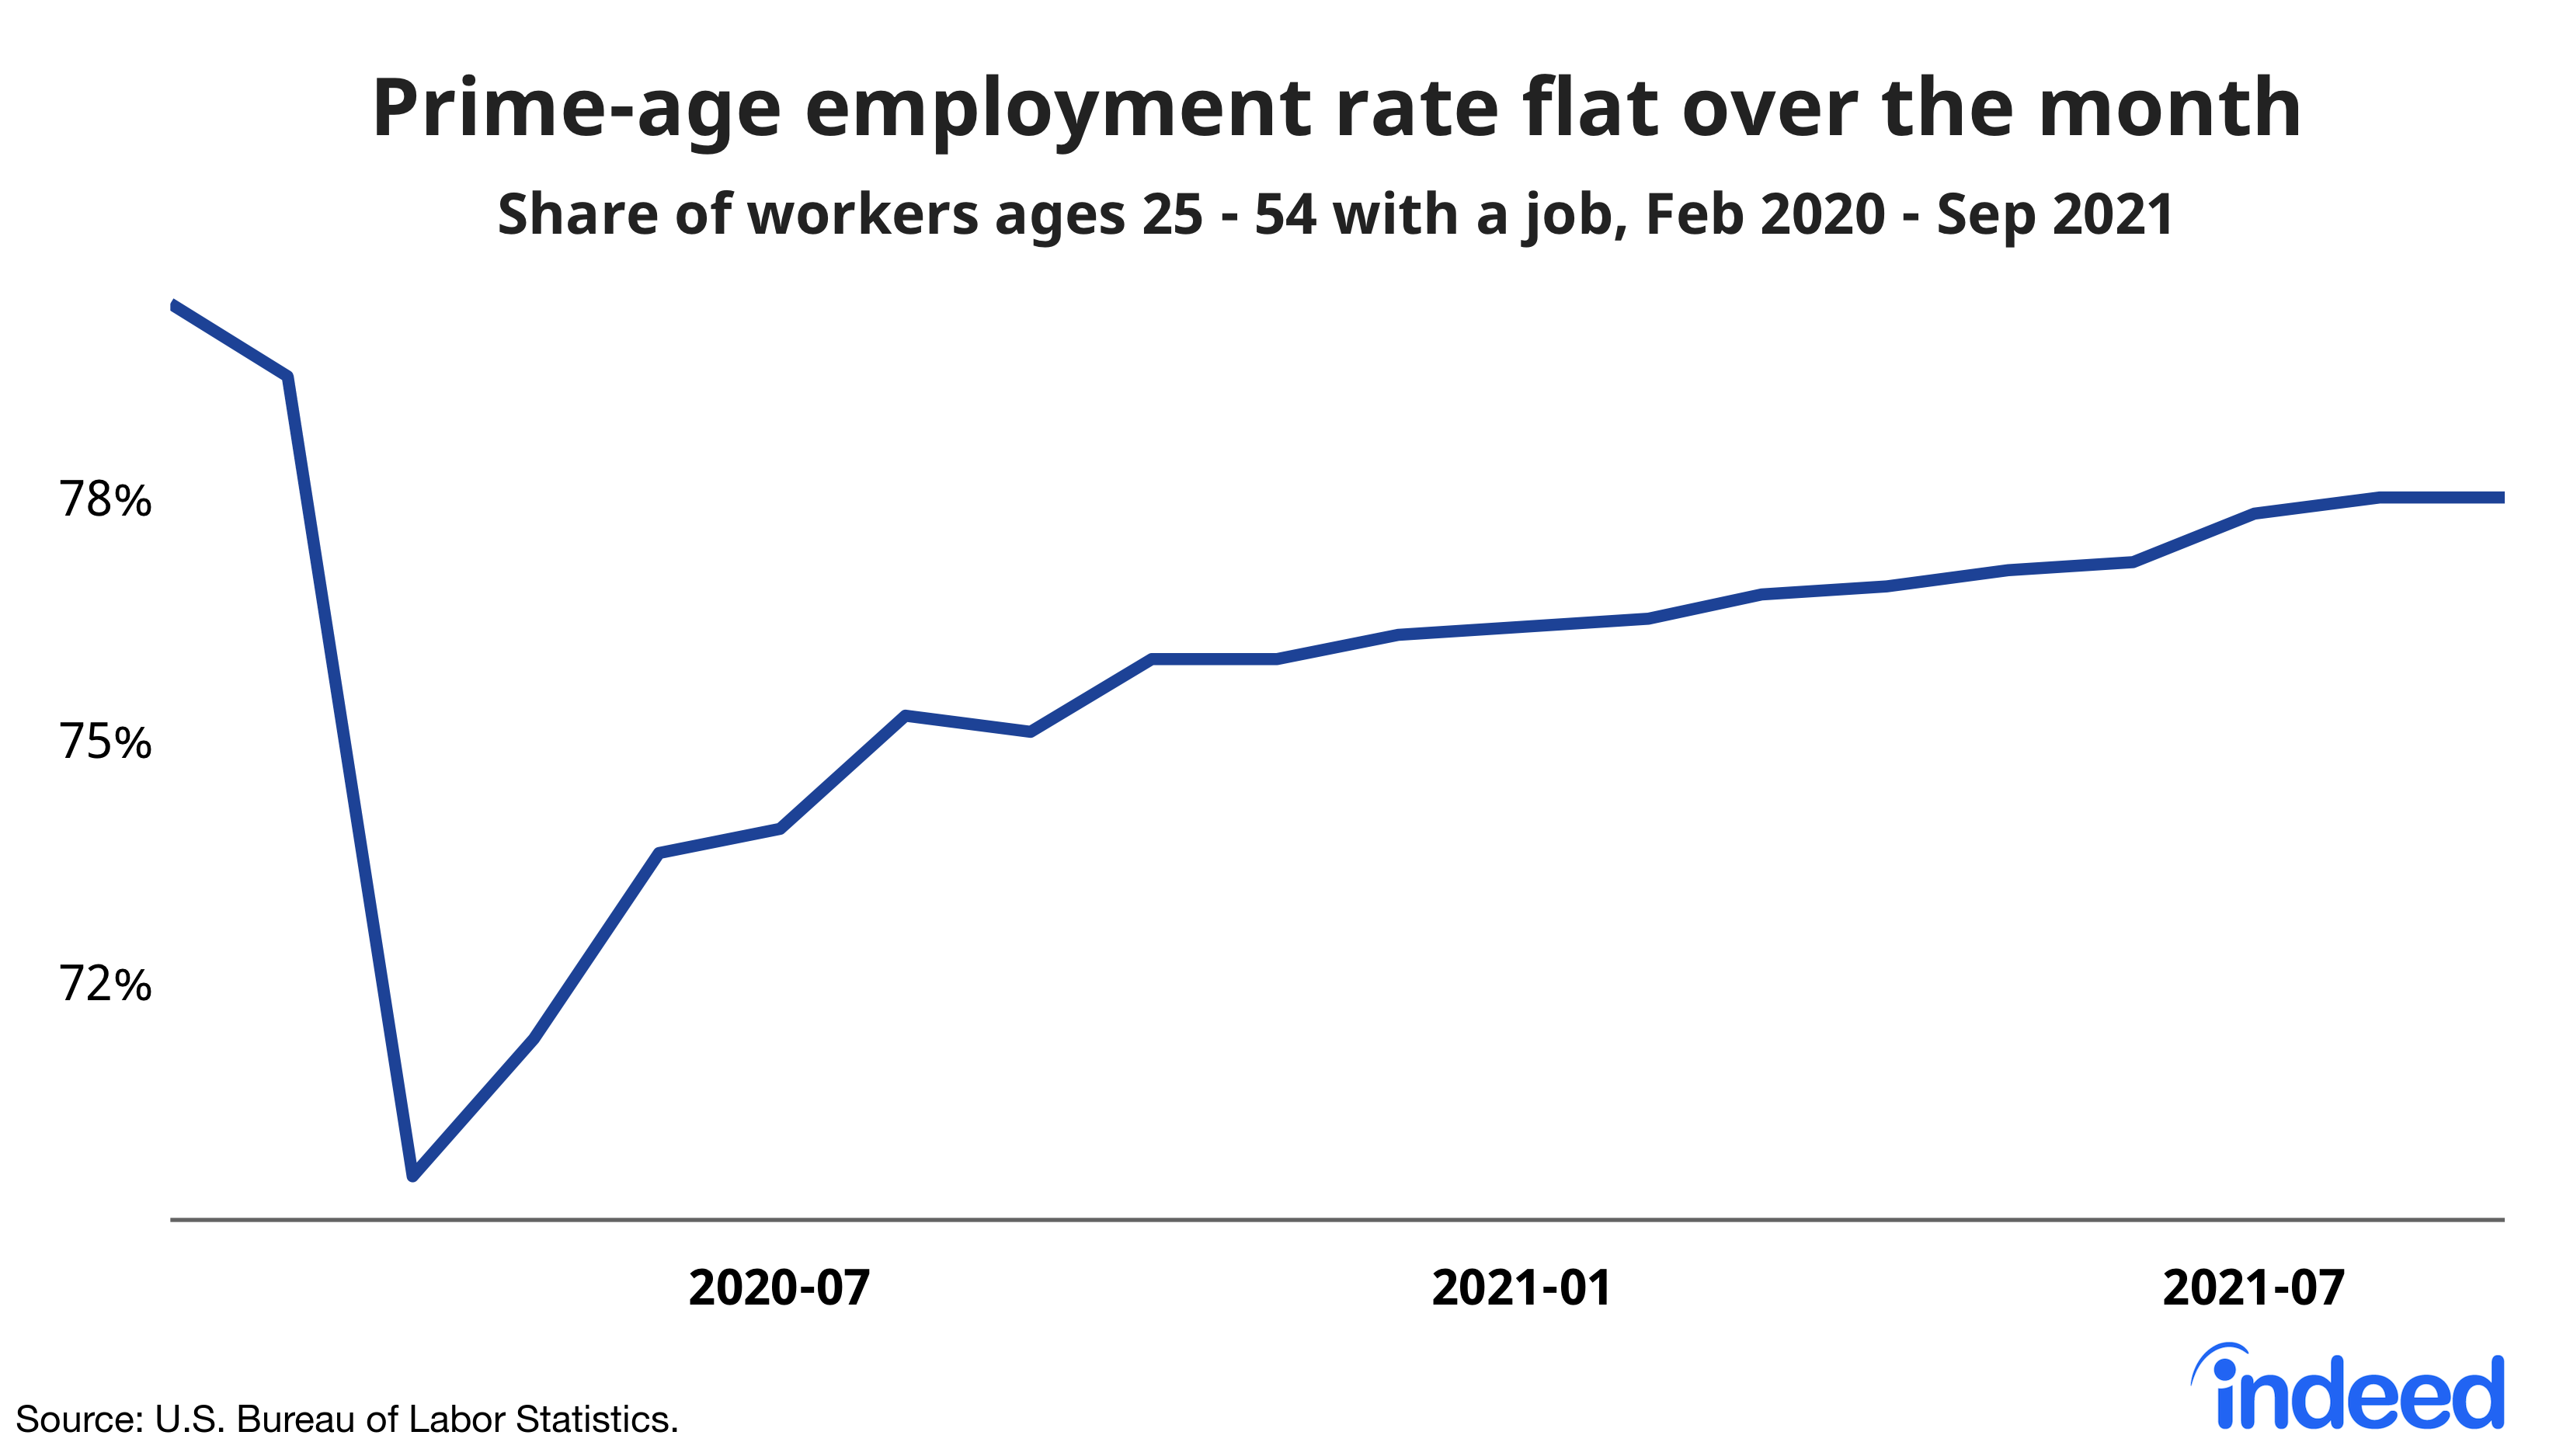 A chart showing the share of workers ages 25-54 with a job from February 2020 to September 2021. It shows that the prime-age employment rate has remained flat over the month.